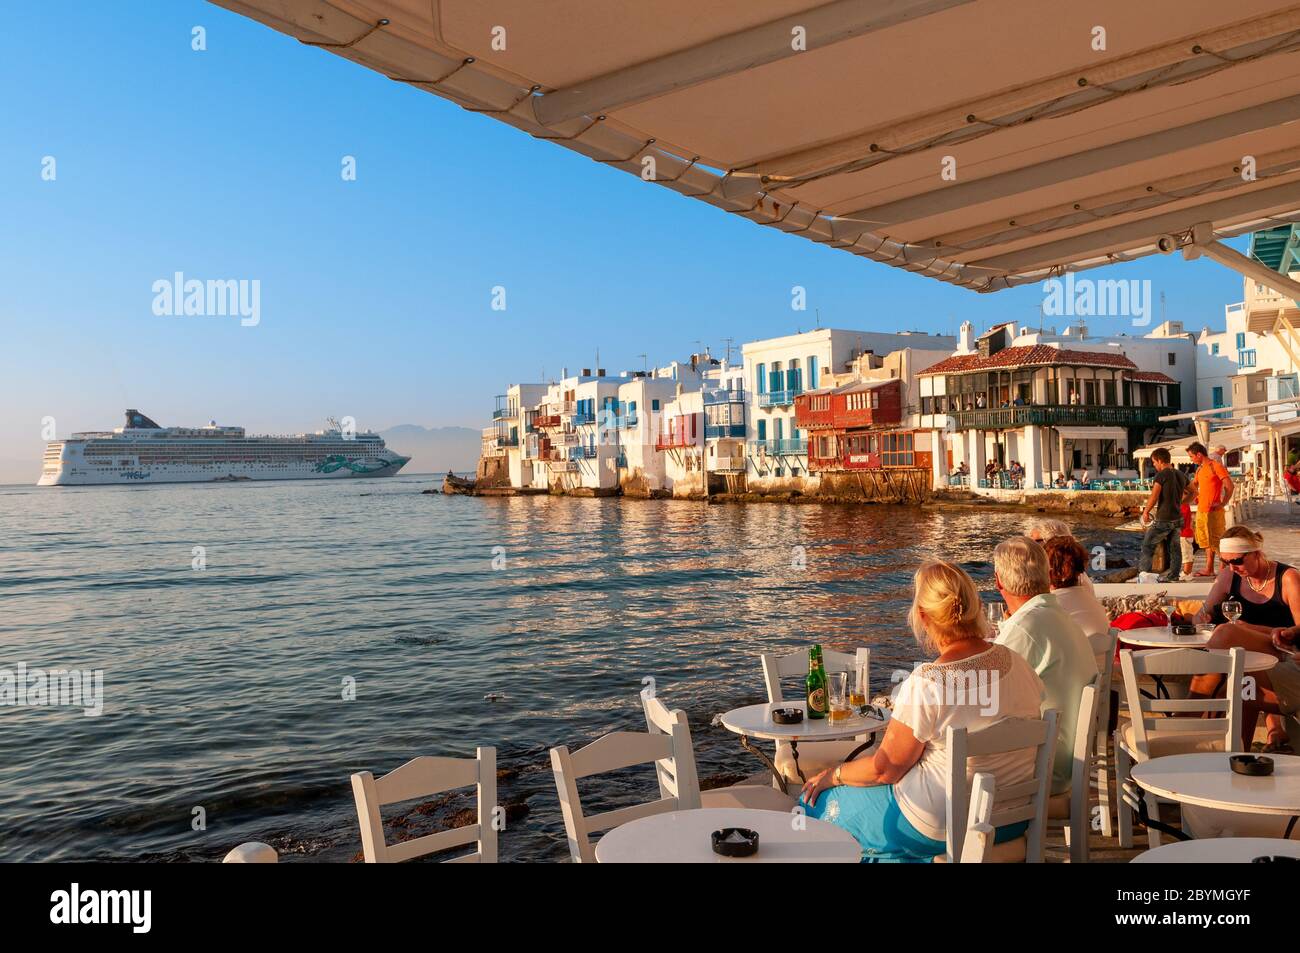 Cruise ship passengers at waterfront restaurant in the Little Venice area of Mykonos, Greece Stock Photo